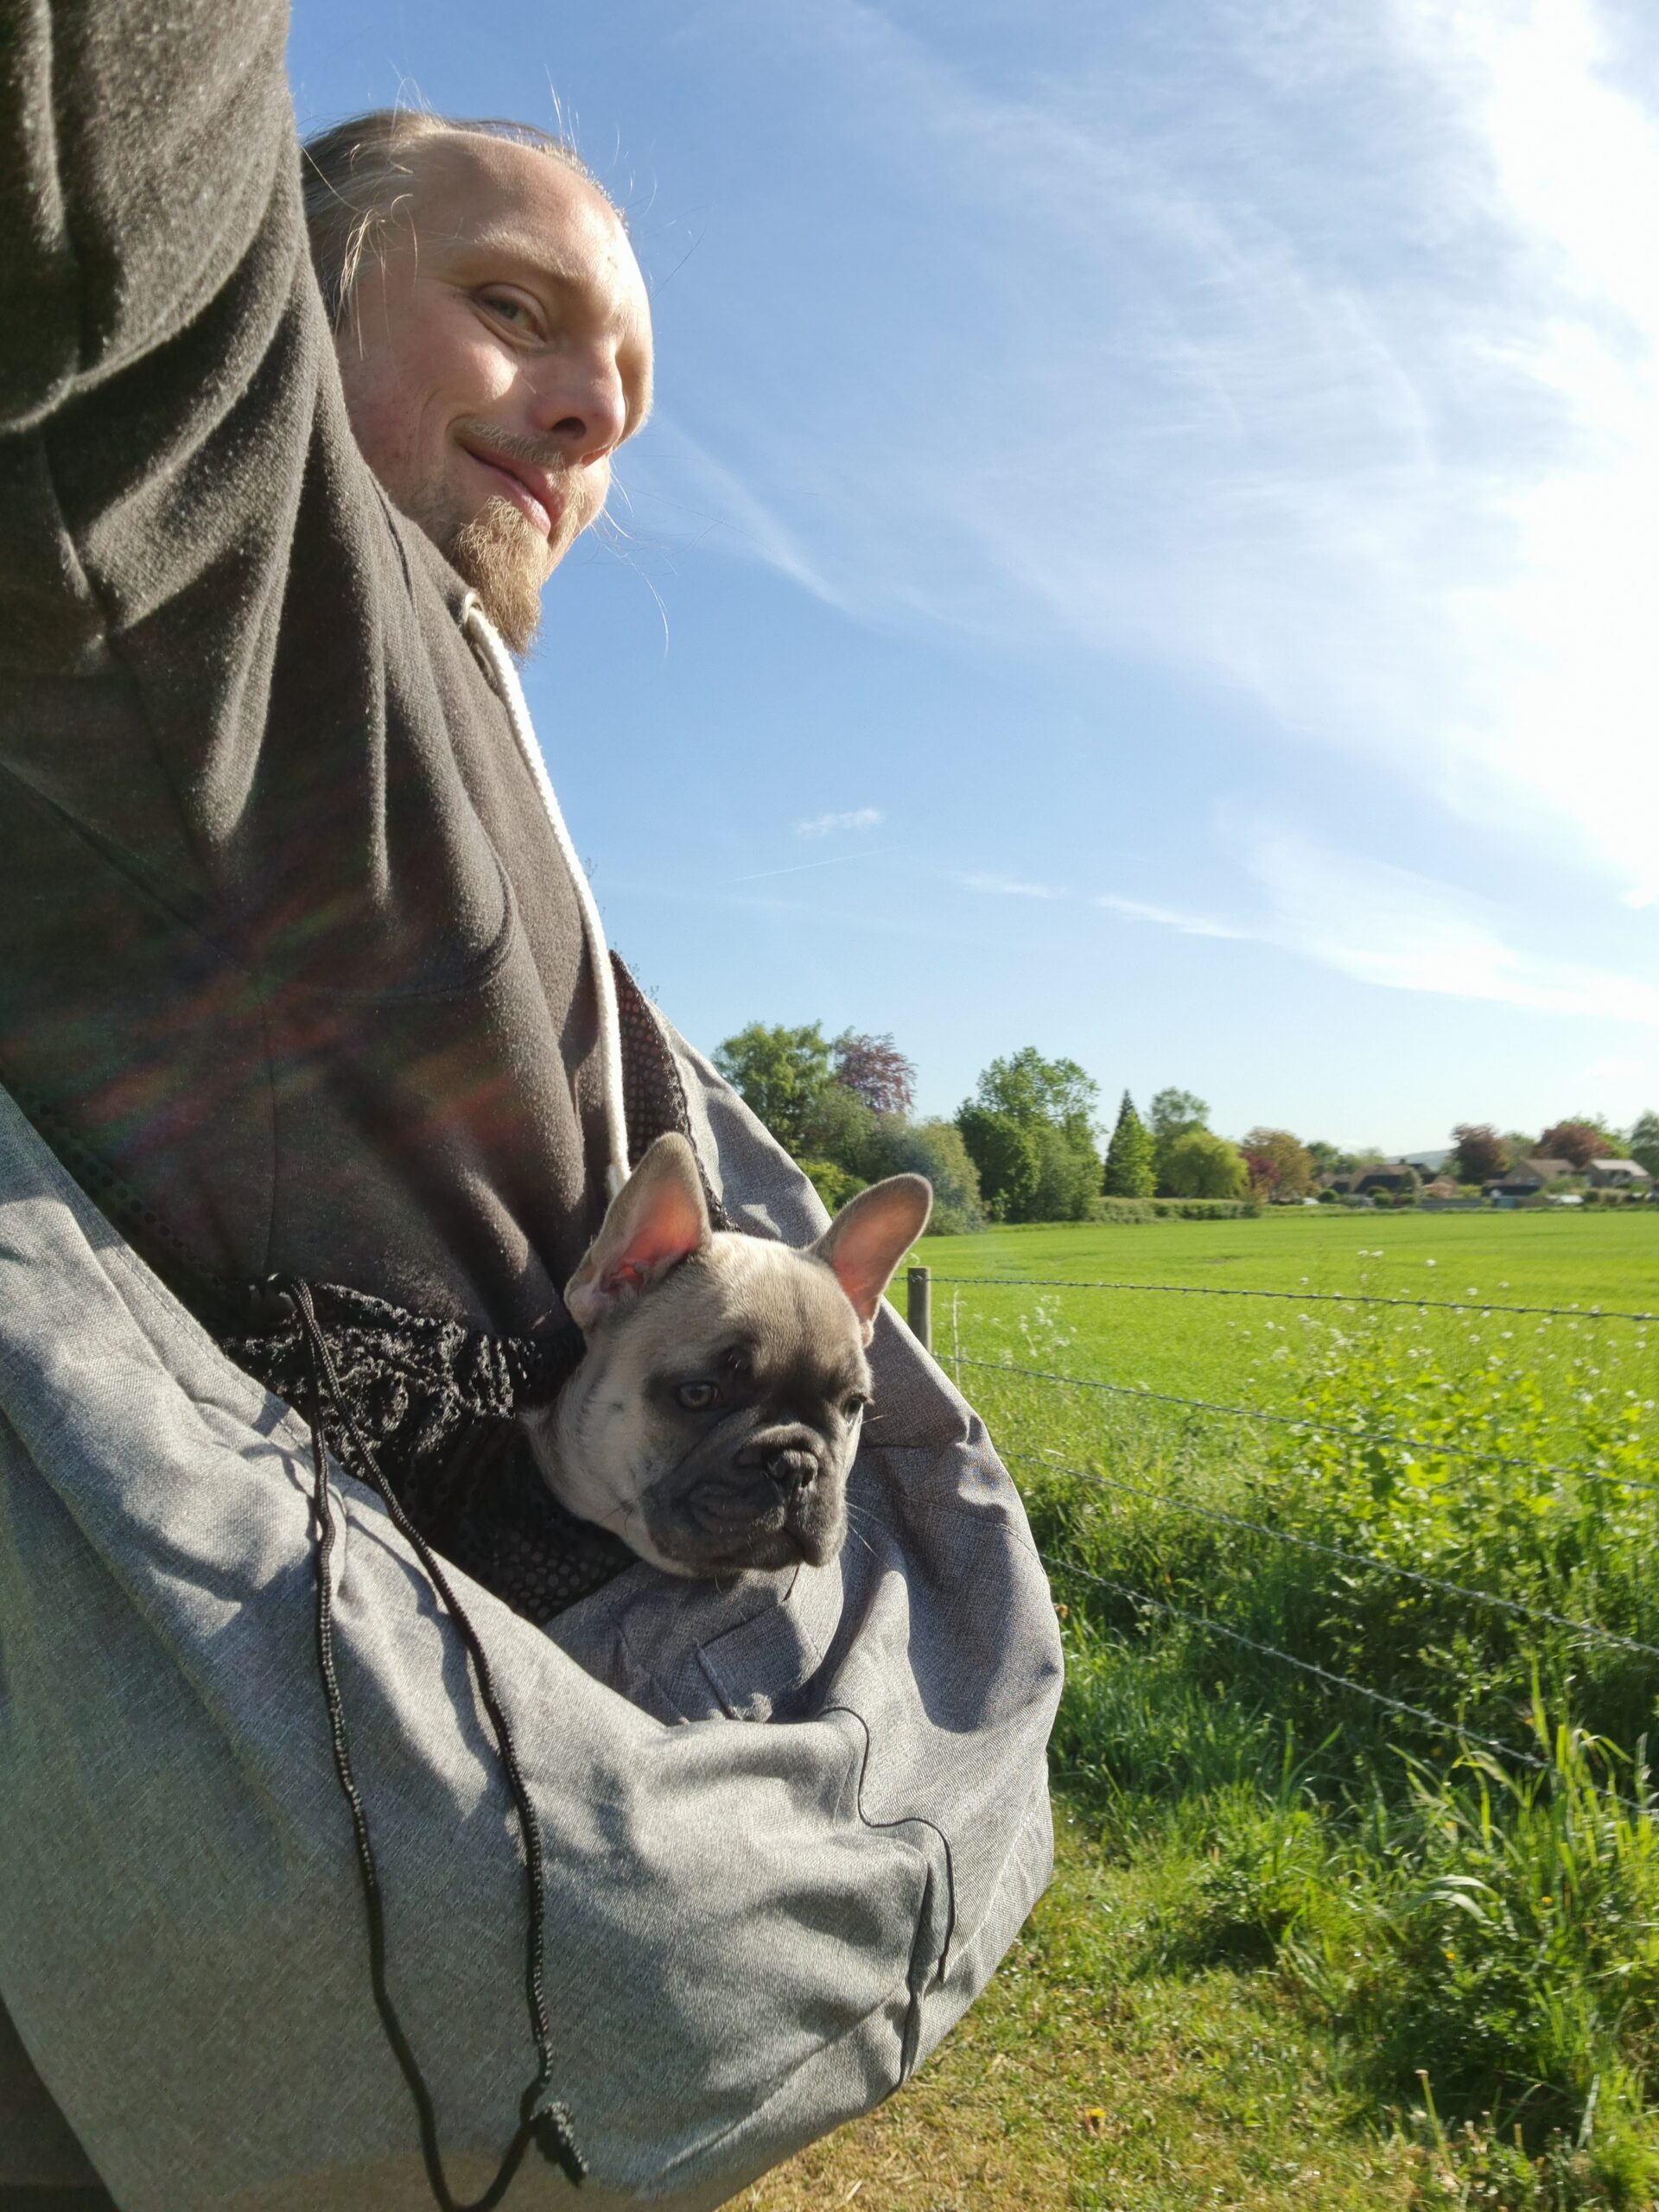 Dan carrying French Bulldog 'Demmy' in a dog carrier bag, with a sunny meadow behind them.